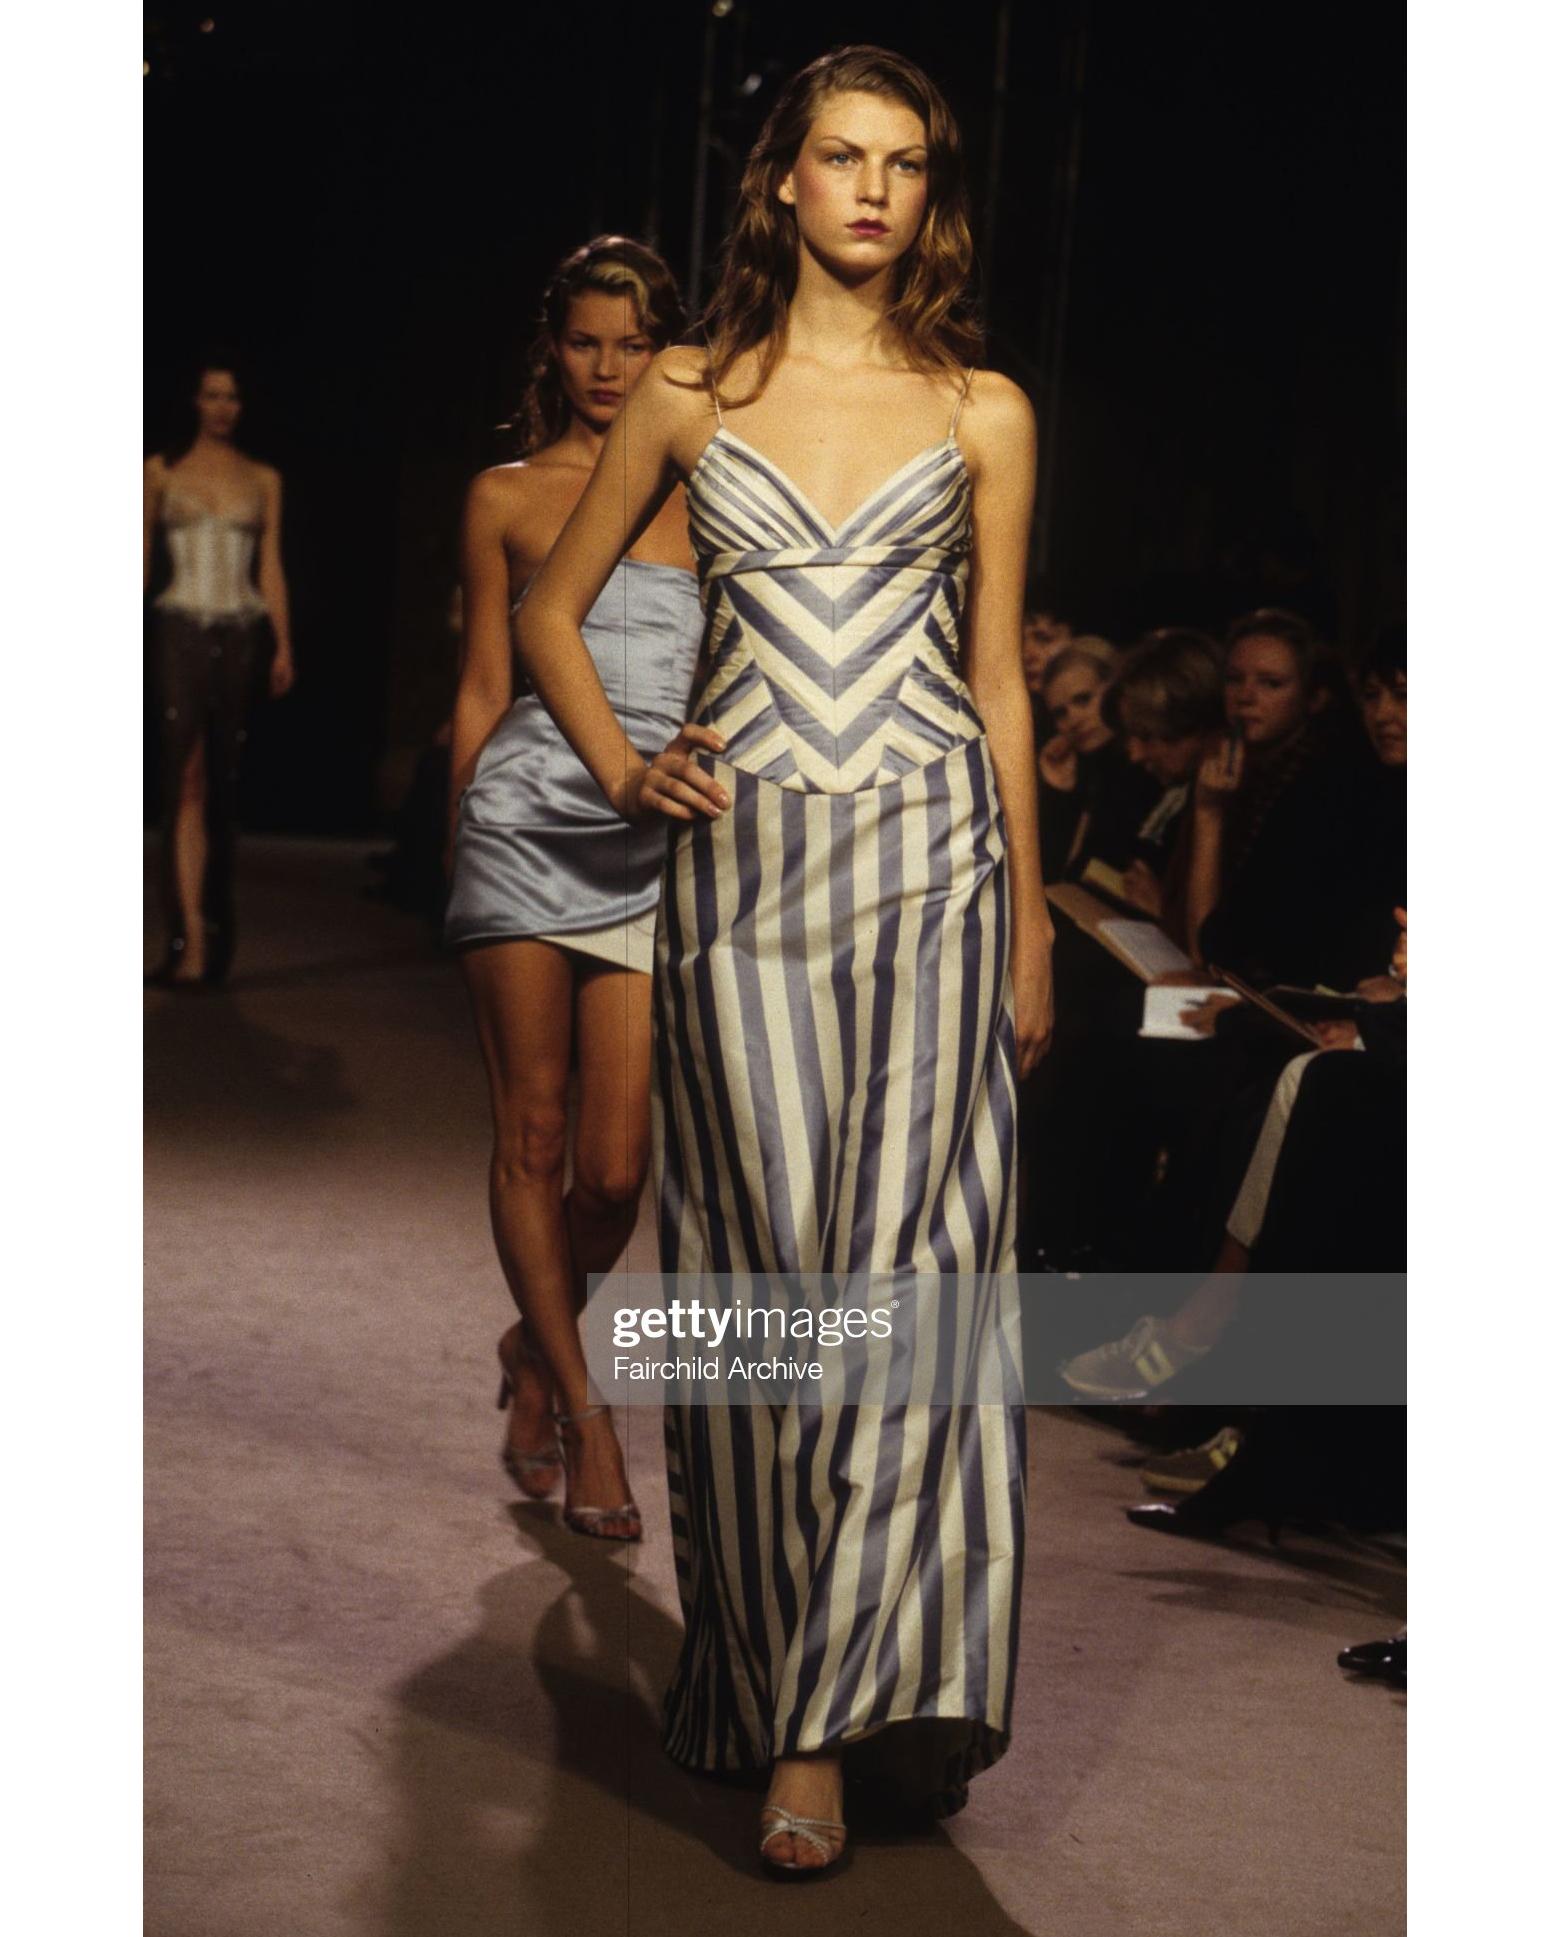 S/S 1998 Chloé by Stella McCartney striped silk taffeta corset gown. Sleeveless blue and cream striped dress with pleated bust and fitted lace-back corset bodice. 100% Silk with 100% Acetate lining. As seen on the runway. From Stella McCartney's